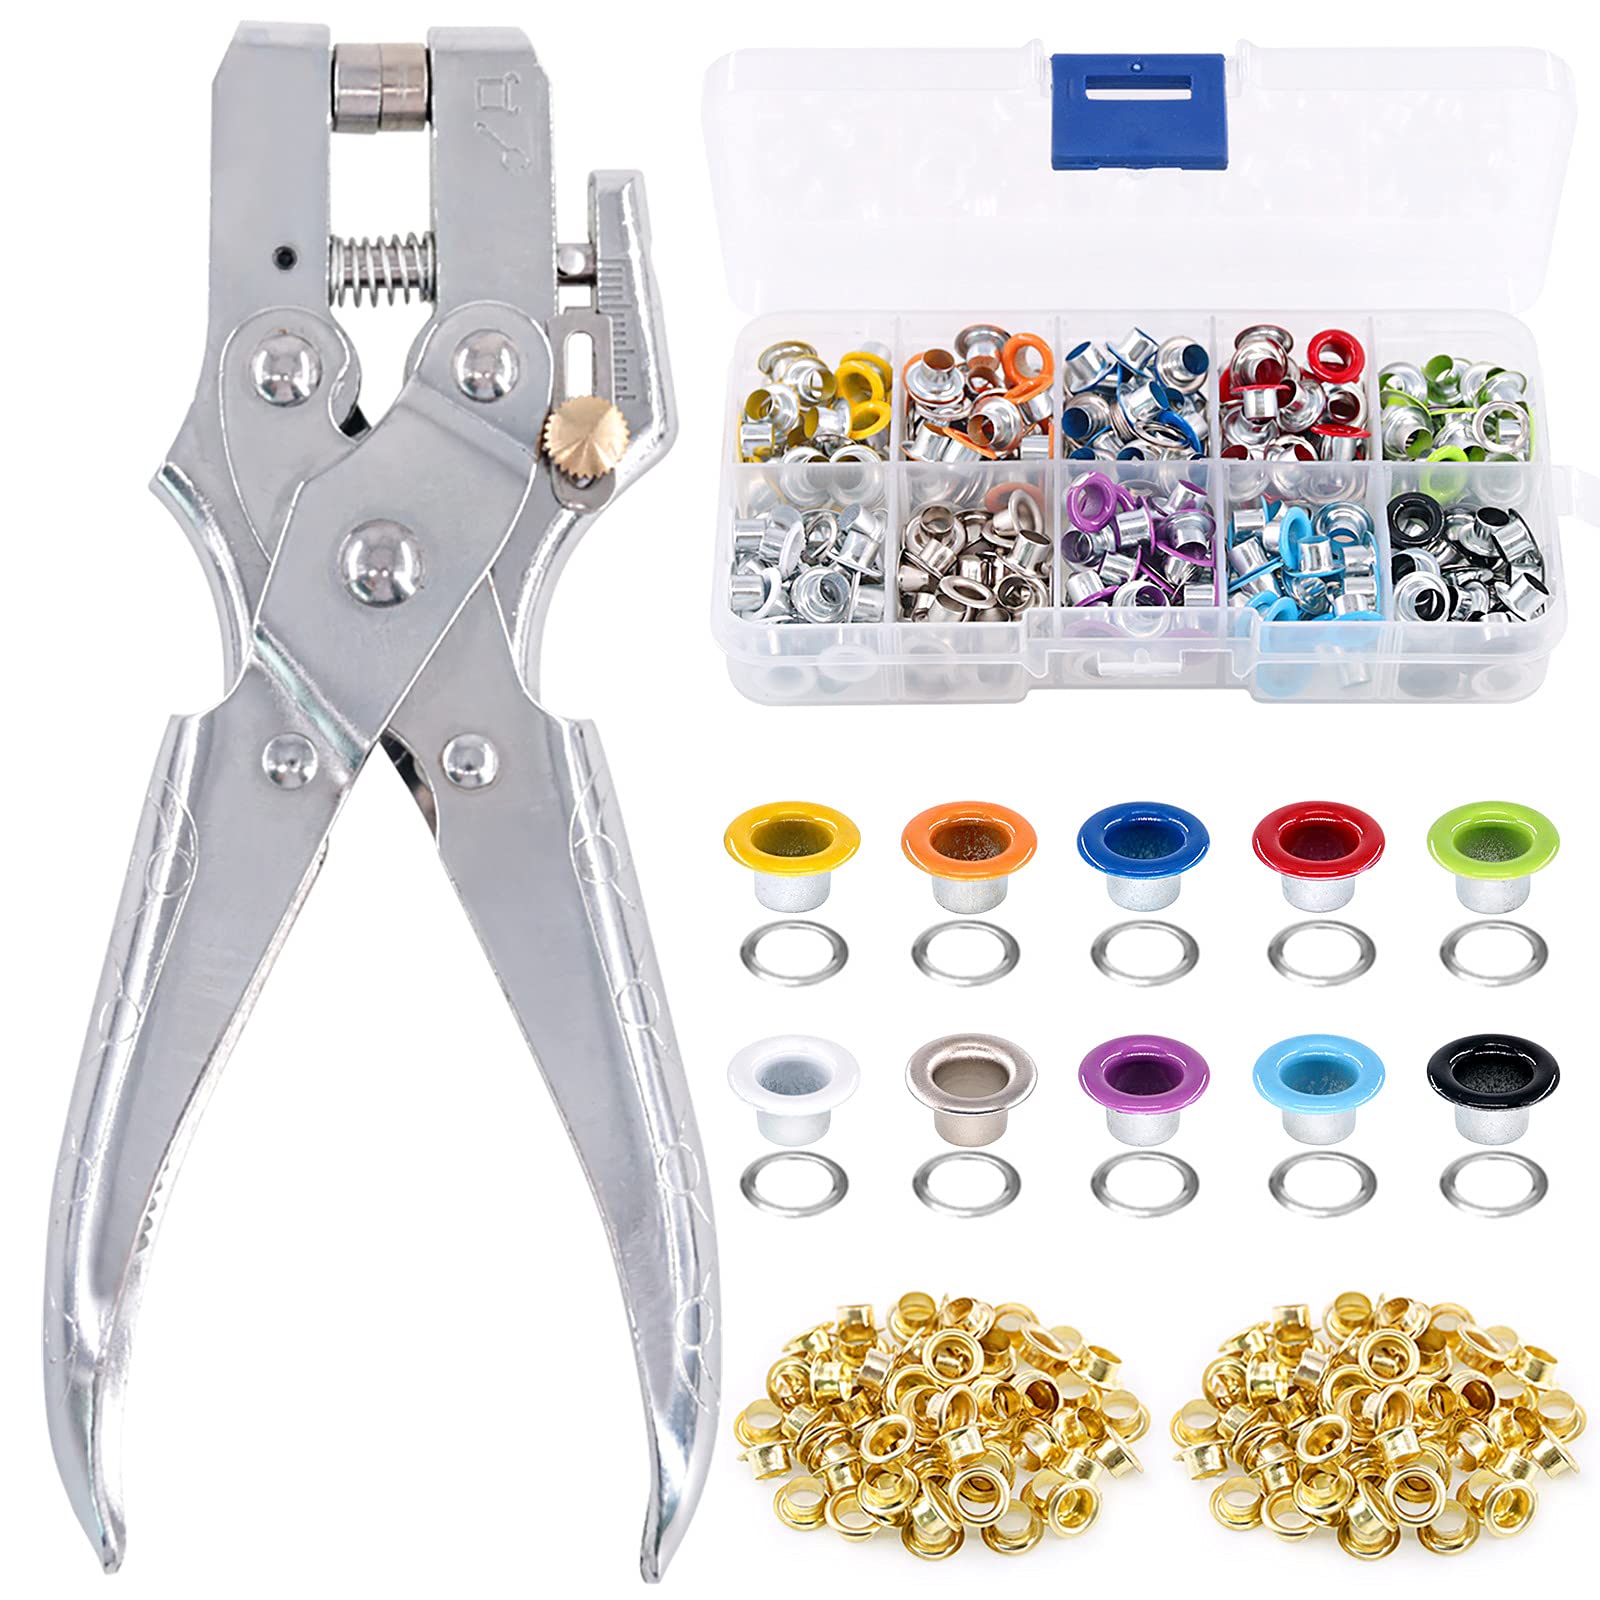 Eyelet Kits  Grommets : Buy Cheap & Discount Fashion Fabric